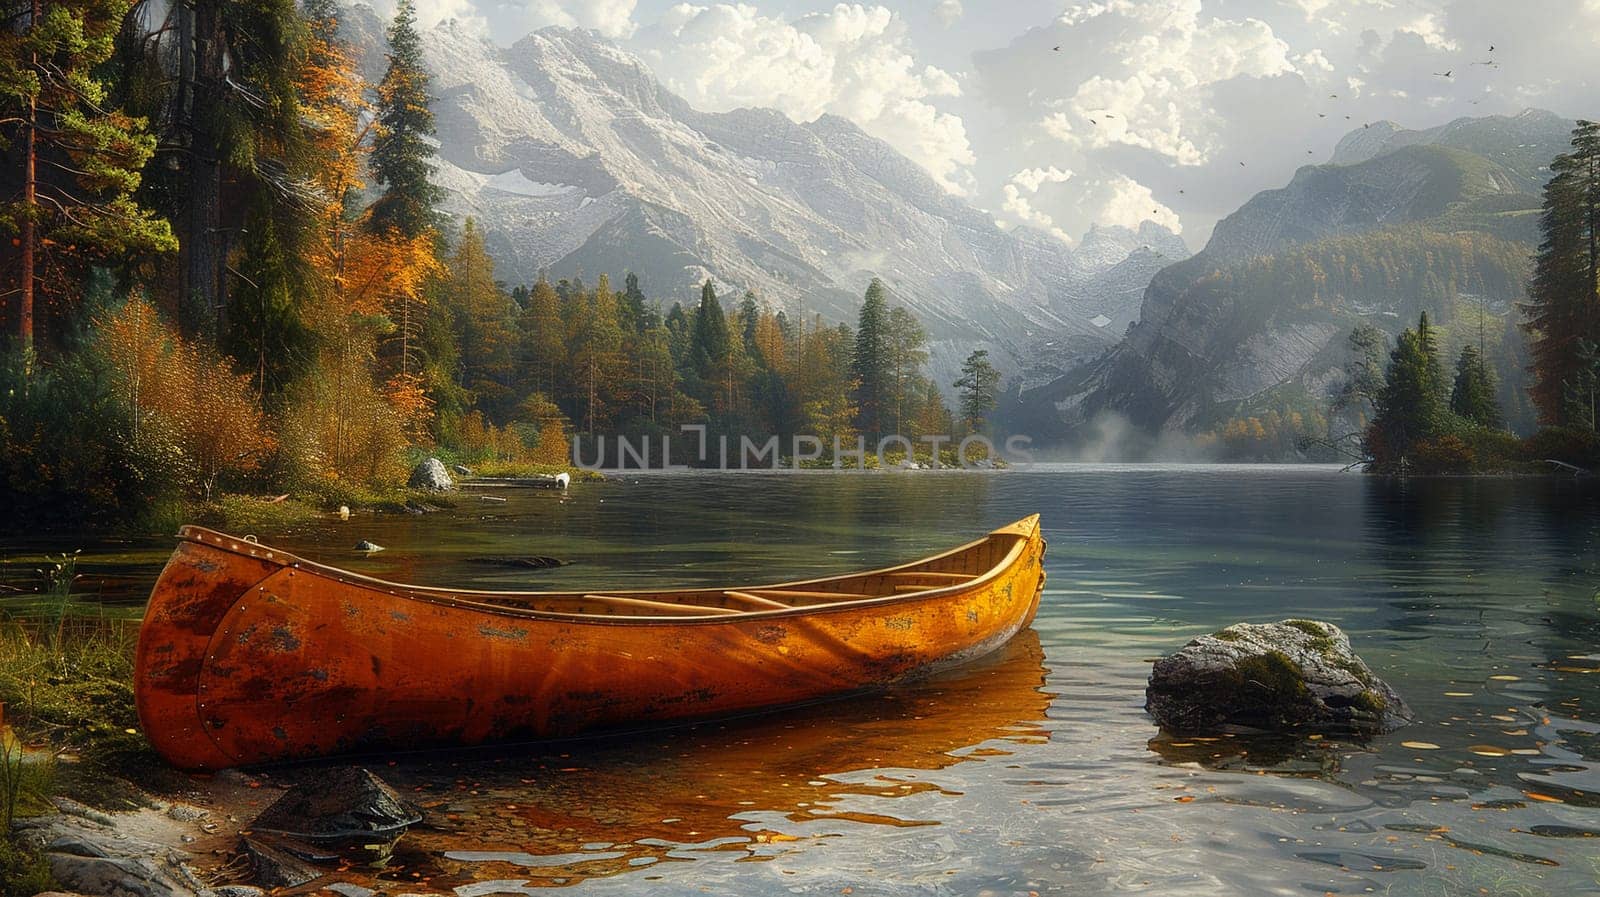 Canoe resting by a lakeside, inviting exploration and tranquility.